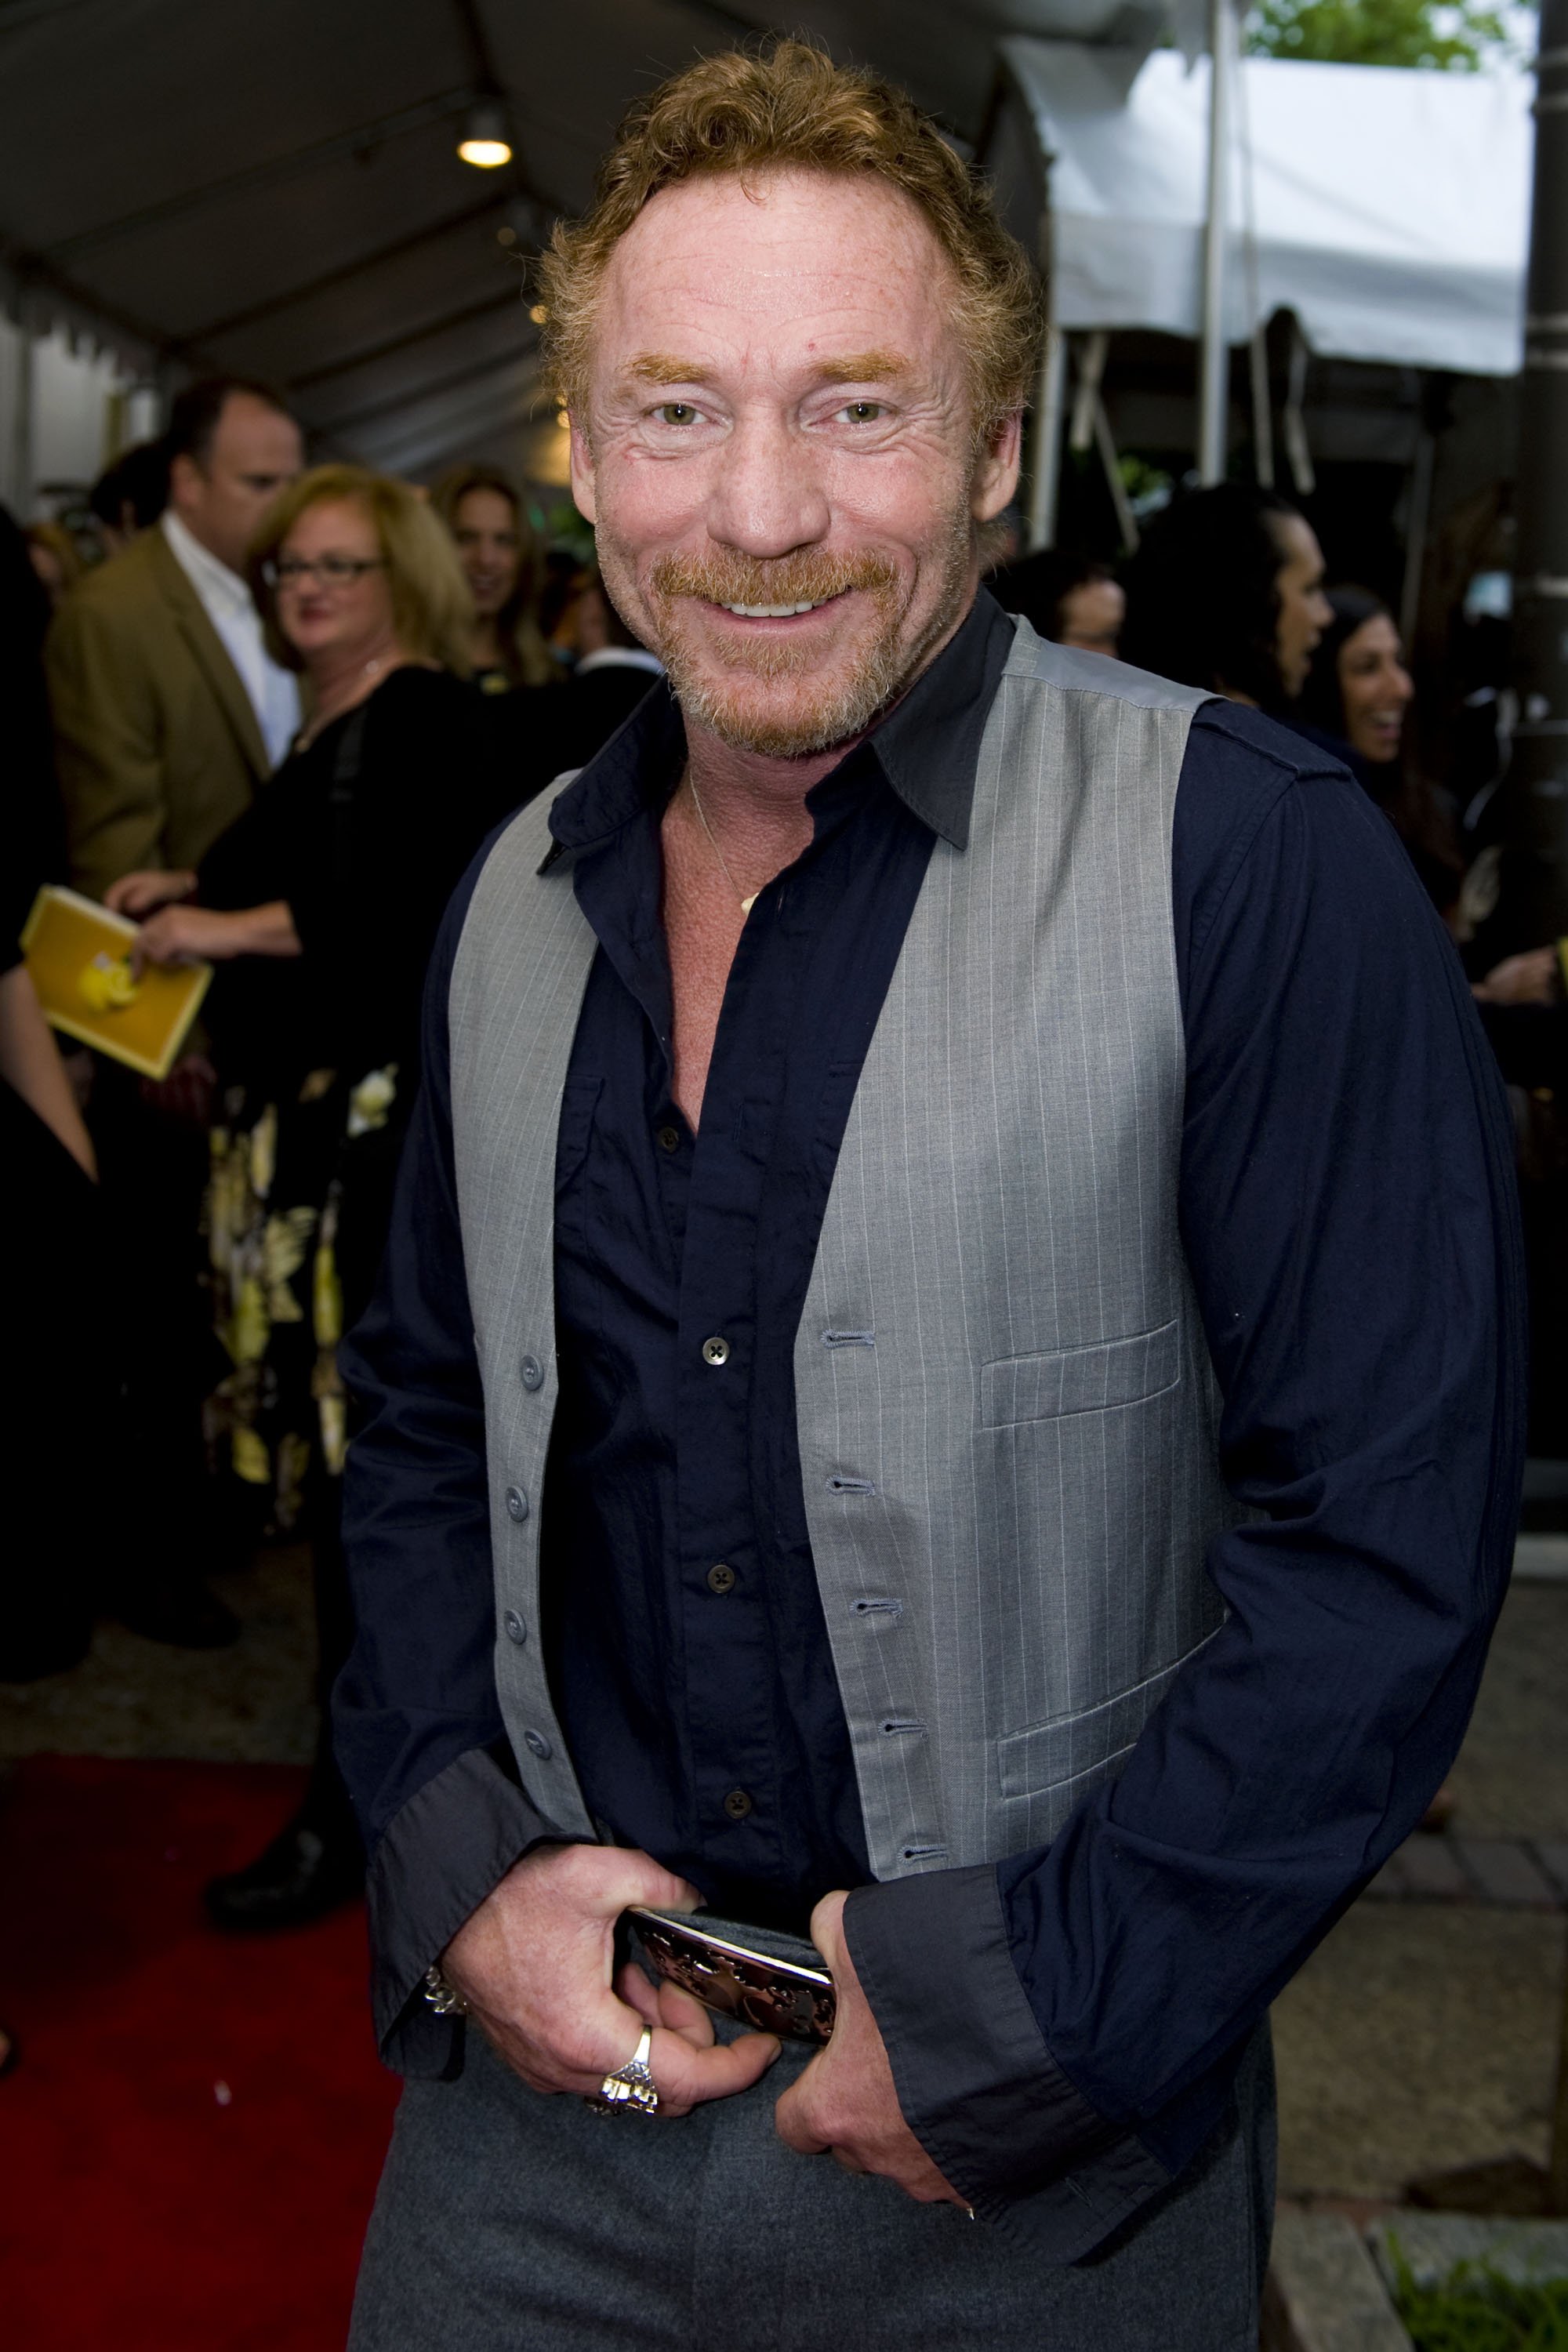 Danny Bonaduce is seen at the 4th Annual Great Chefs Event Benefiting Alex's Lemonade Stand Foundation at Osteria on June 17, 2009 | Photo: Getty Images